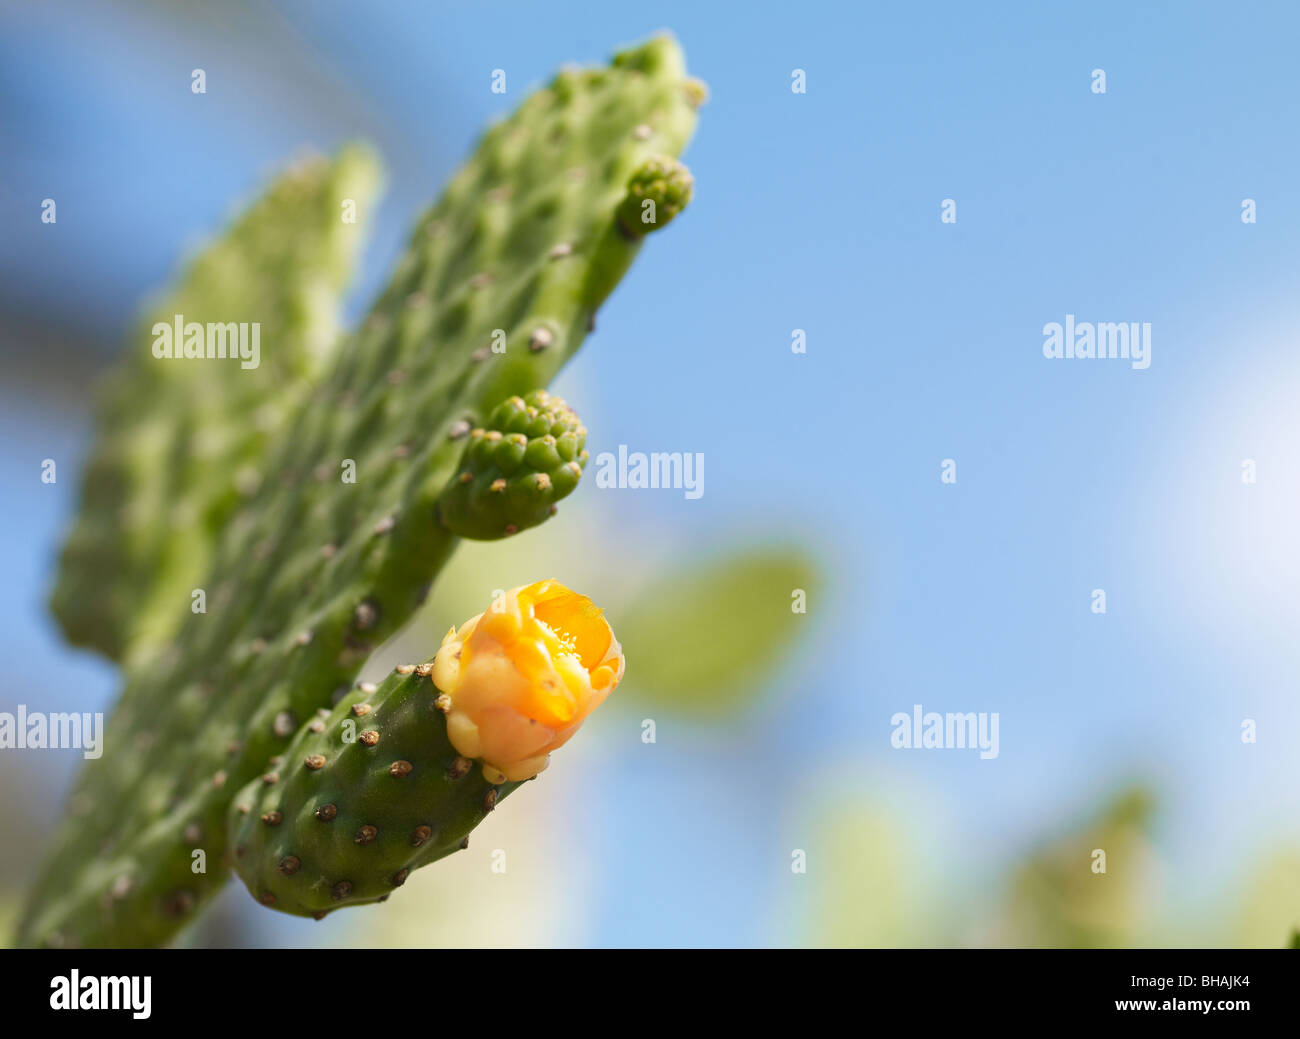 flowering cactus yellow flower L sunny colour Stock Photo